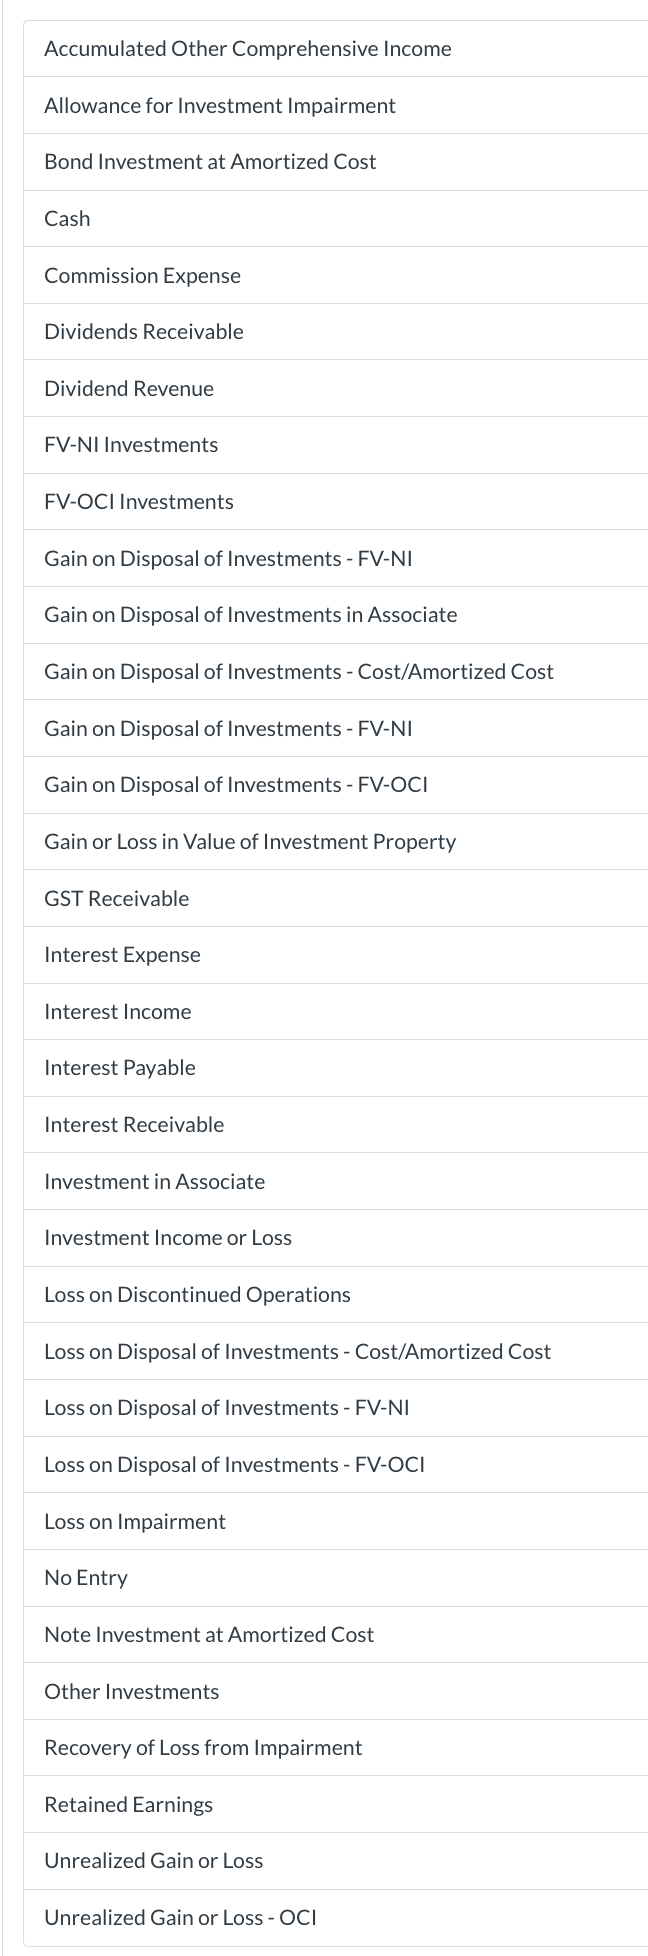 Accumulated Other Comprehensive Income
Allowance for Investment Impairment
Bond Investment at Amortized Cost
Cash
Commission Expense
Dividends Receivable
Dividend Revenue
FV-NI Investments
FV-OCI Investments
Gain on Disposal of Investments - FV-NI
Gain on Disposal of Investments in Associate
Gain on Disposal of Investments - Cost/Amortized Cost
Gain on Disposal of Investments - FV-NI
Gain on Disposal of Investments - FV-OCI
Gain or Loss in Value of Investment Property
GST Receivable
Interest Expense
Interest Income
Interest Payable
Interest Receivable
Investment in Associate
Investment Income or Loss
Loss on Discontinued Operations
Loss on Disposal of Investments - Cost/Amortized Cost
Loss on Disposal of Investments - FV-NI
Loss on Disposal of Investments - FV-OCI
Loss on Impairment
No Entry
Note Investment at Amortized Cost
Other Investments
Recovery of Loss from Impairment
Retained Earnings
Unrealized Gain or Loss
Unrealized Gain or Loss - OCI